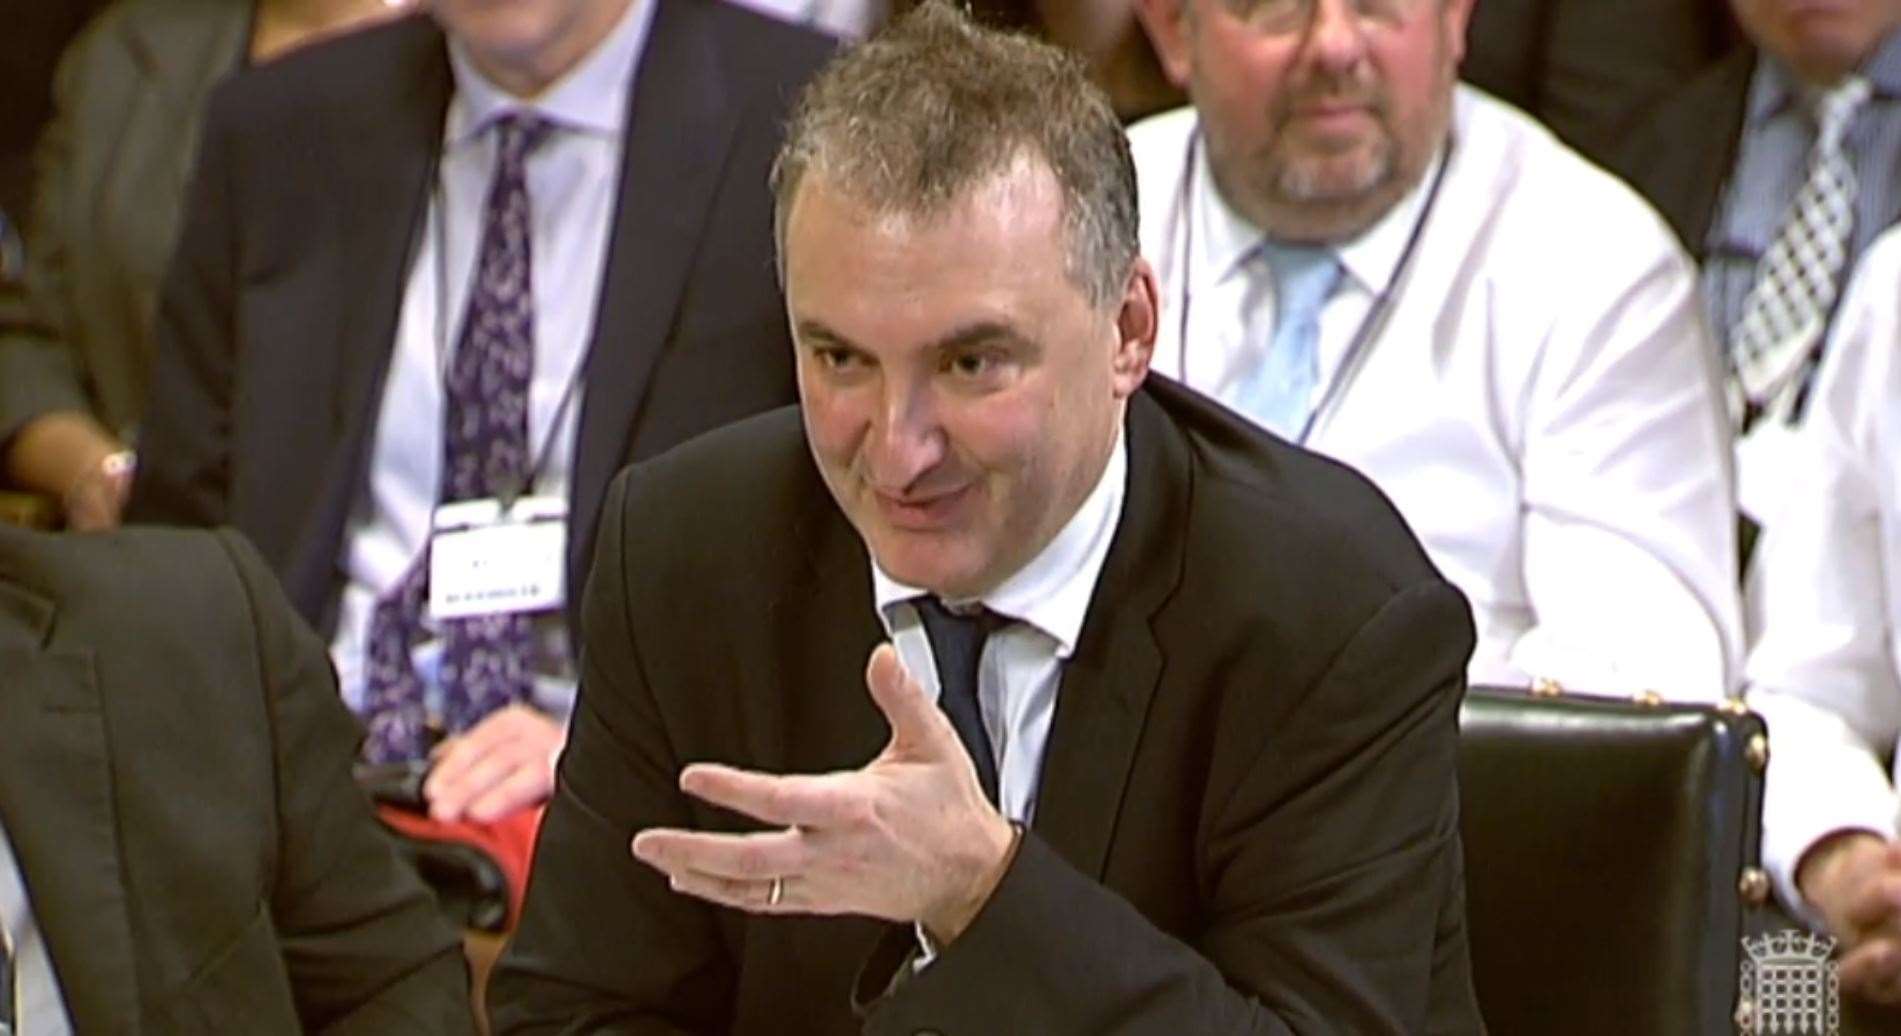 Sir Chris Wormald, permanent secretary at the Department of Health and Social Care. (PA)